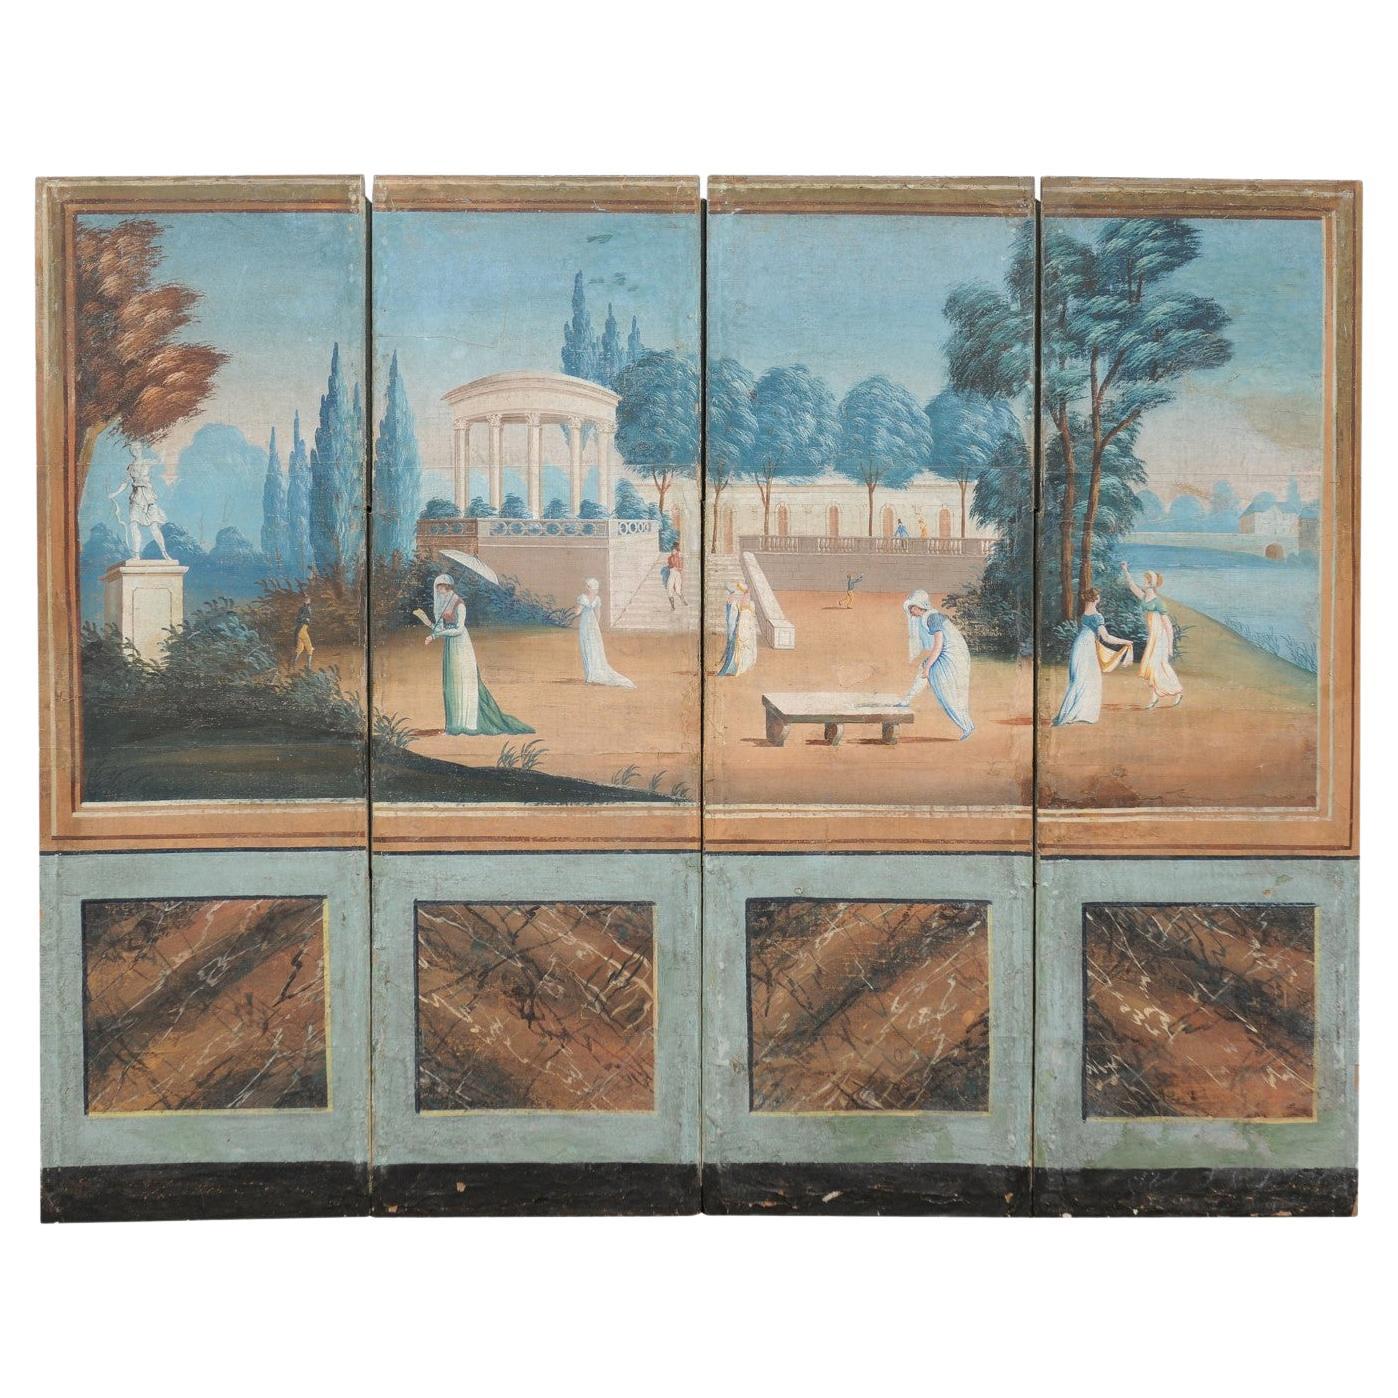 19th Century French Folding Screen with Original Hand-Painted Outdoor Scene